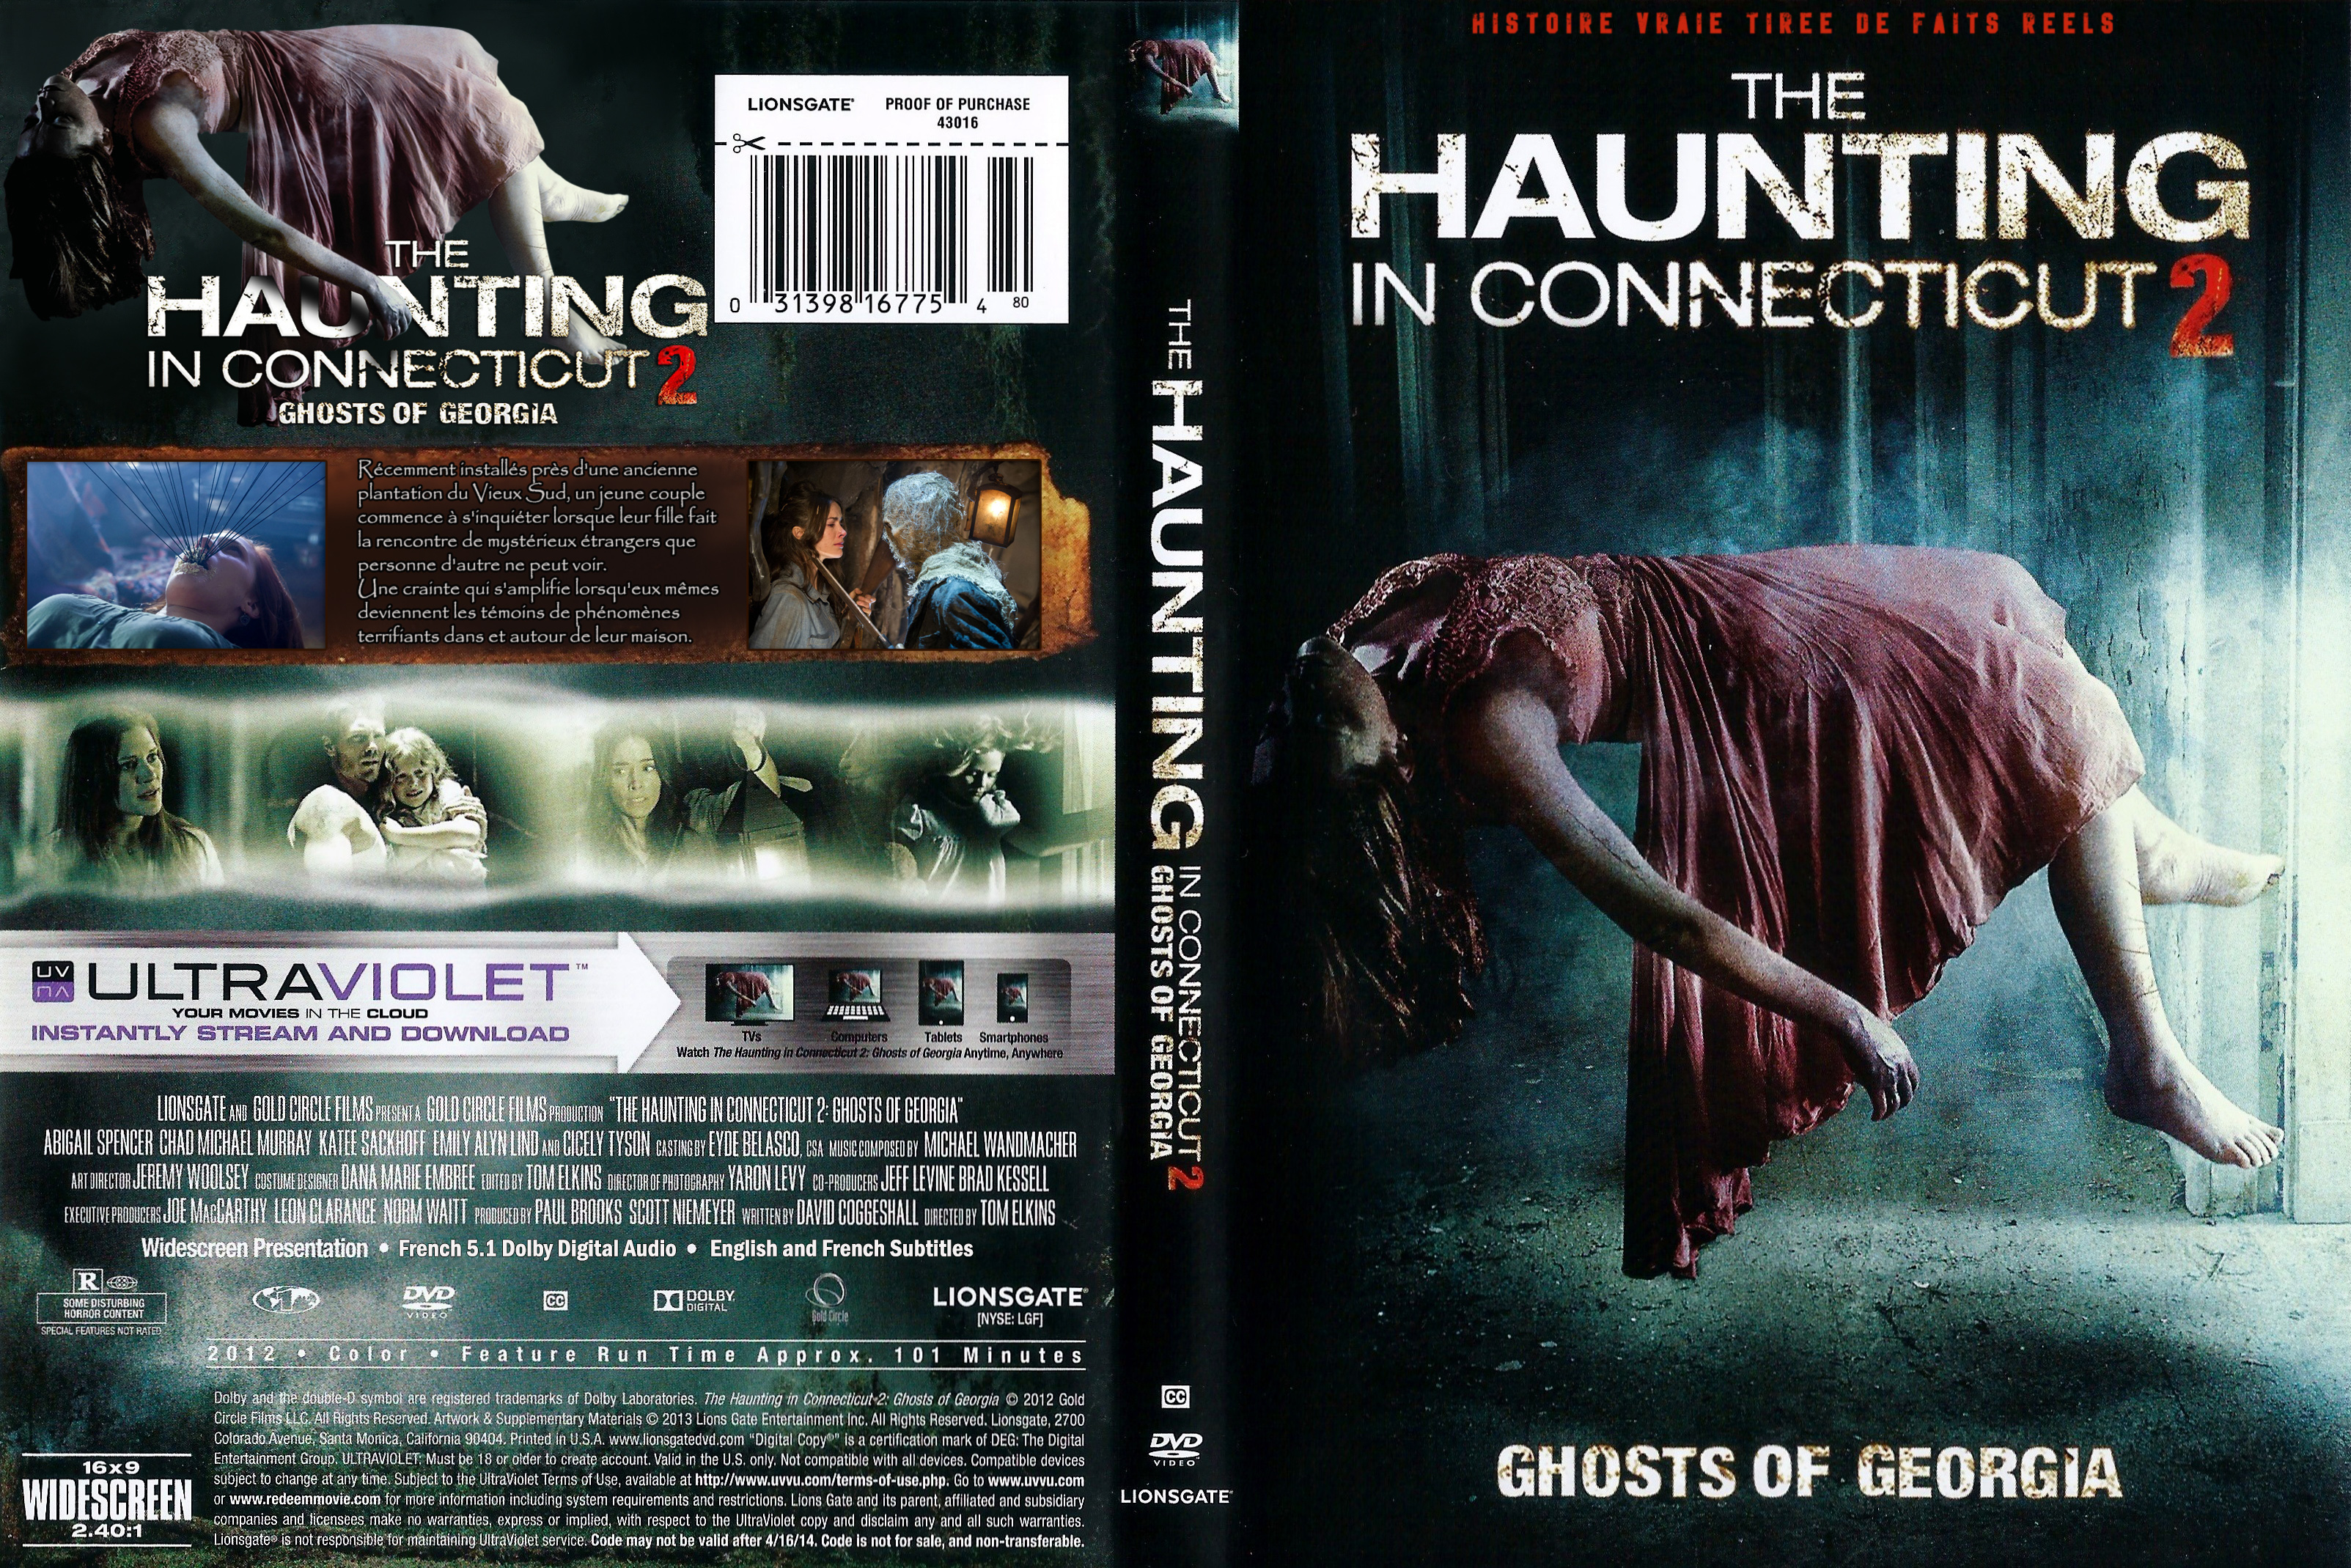 Jaquette DVD The Haunting in Connecticut 2 Ghosts of Georgia custom